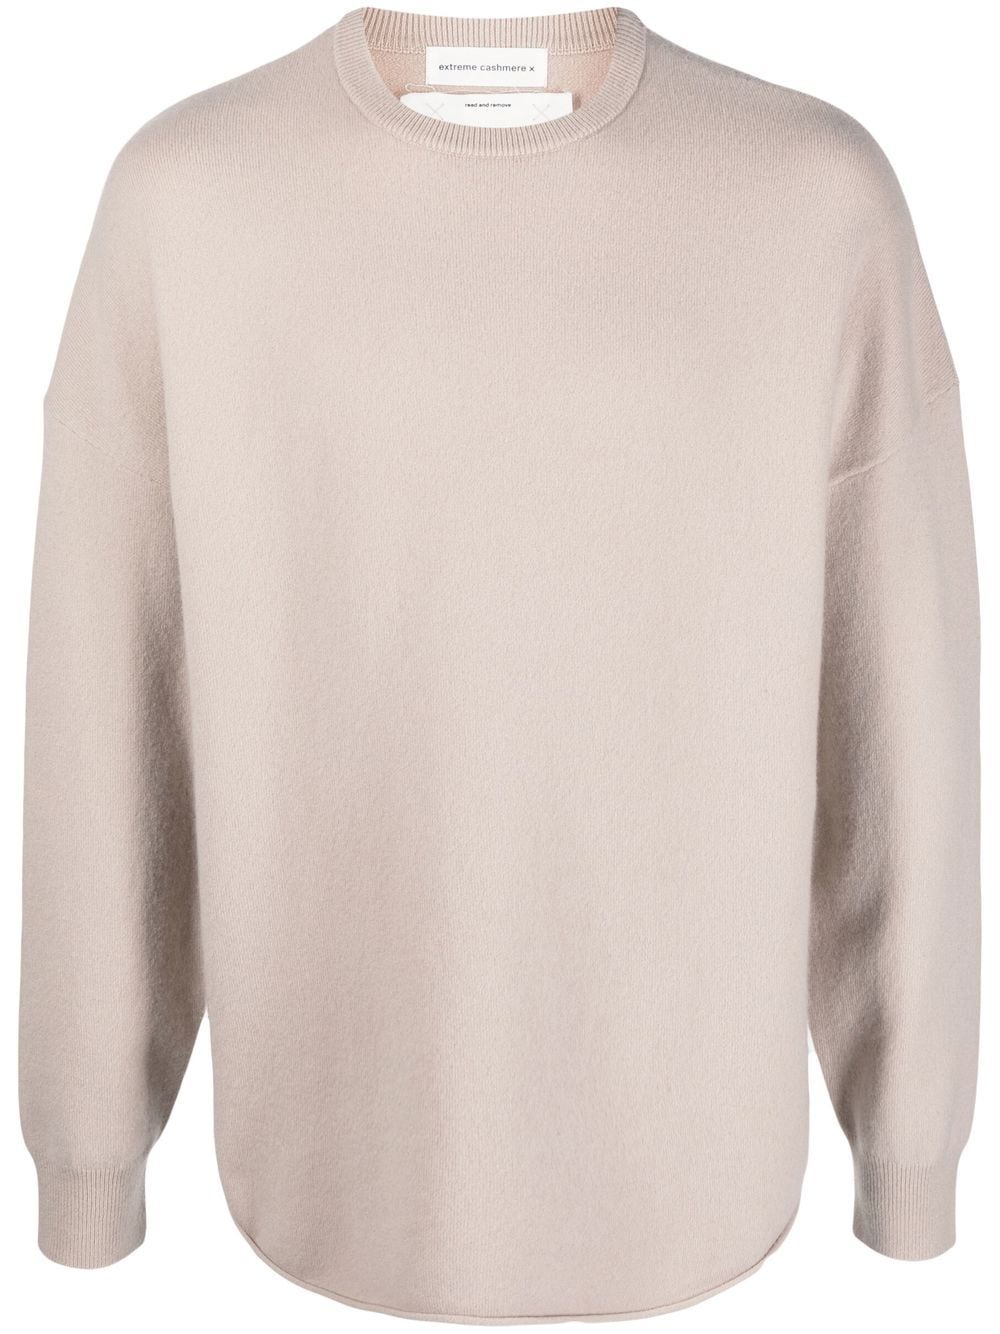 EXTREME CASHMERE LONG-SLEEVE CASHMERE TOP